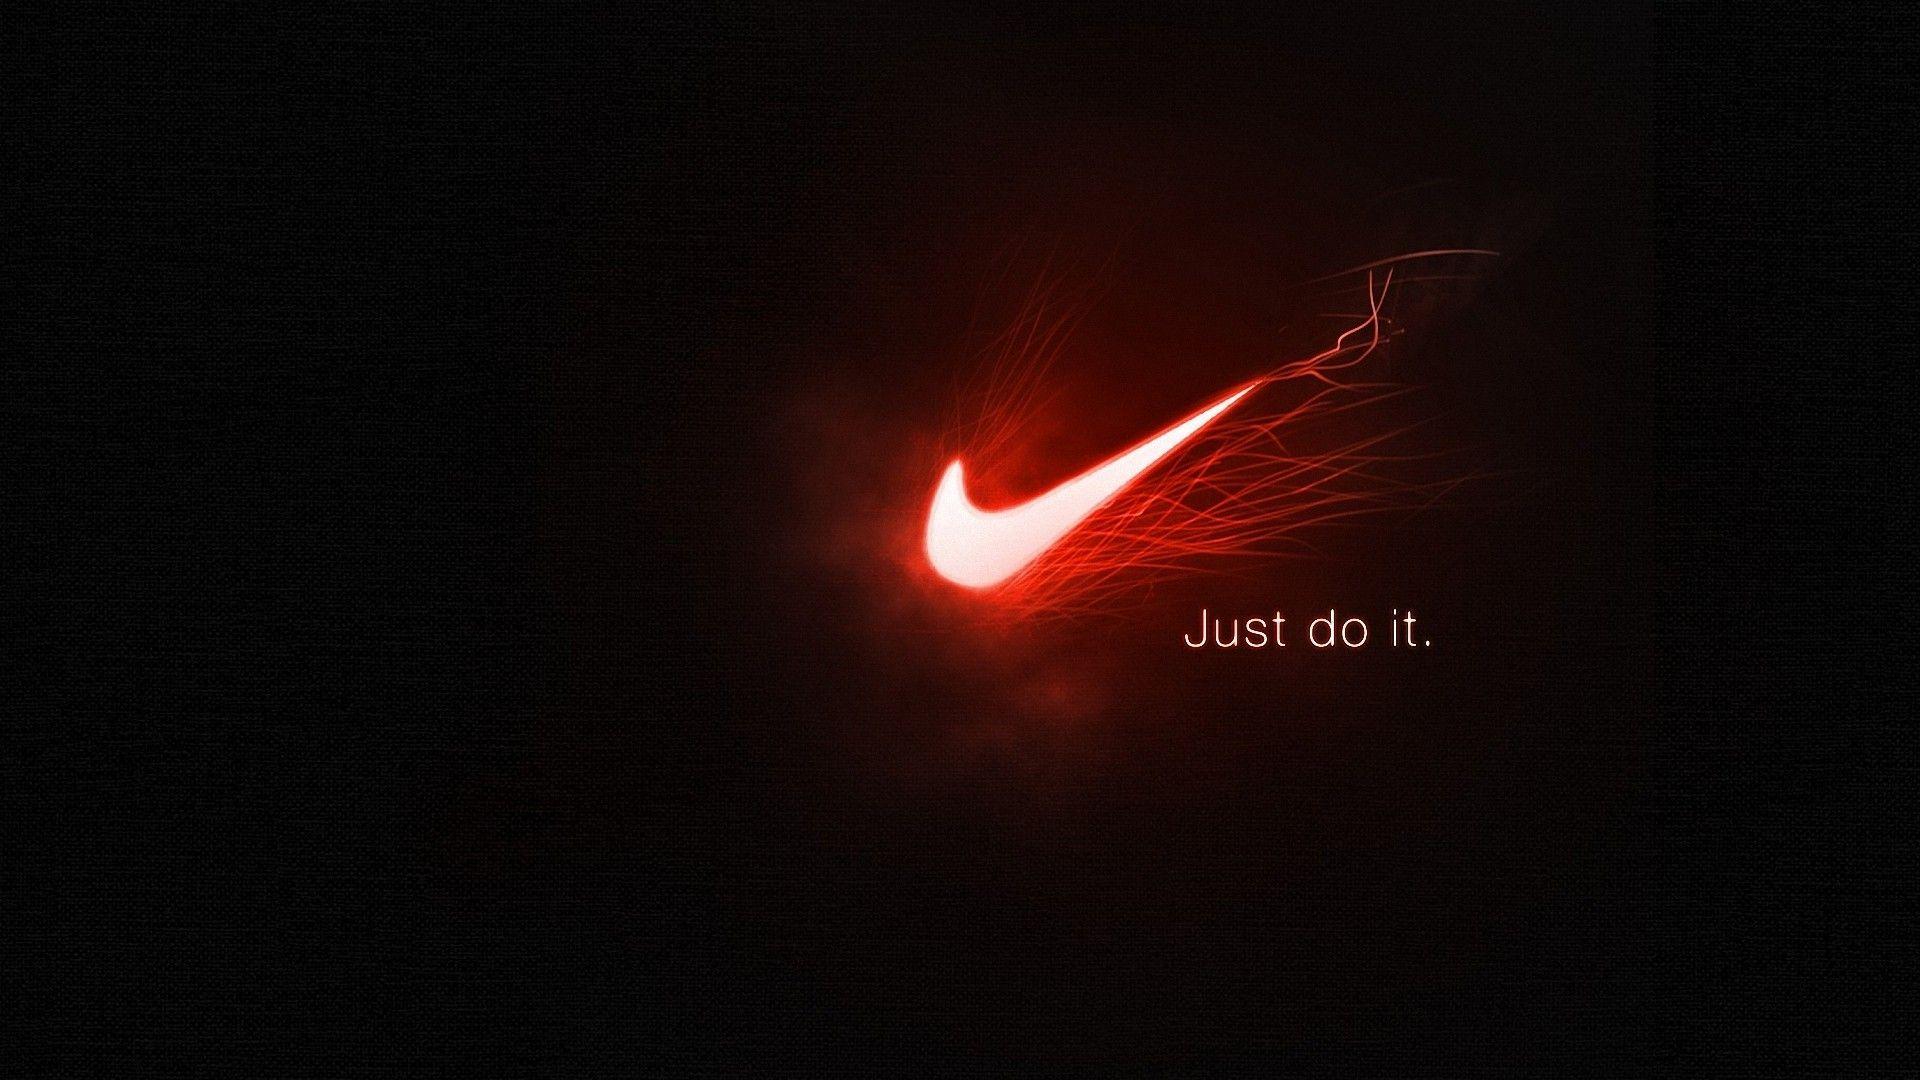 Nike Running Shoes Box With Just Do It And Nike Logo On Orange Box In The  Store : Bangkok Thailand November 4, 2020 Stock Photo, Picture and Royalty  Free Image. Image 158857015.